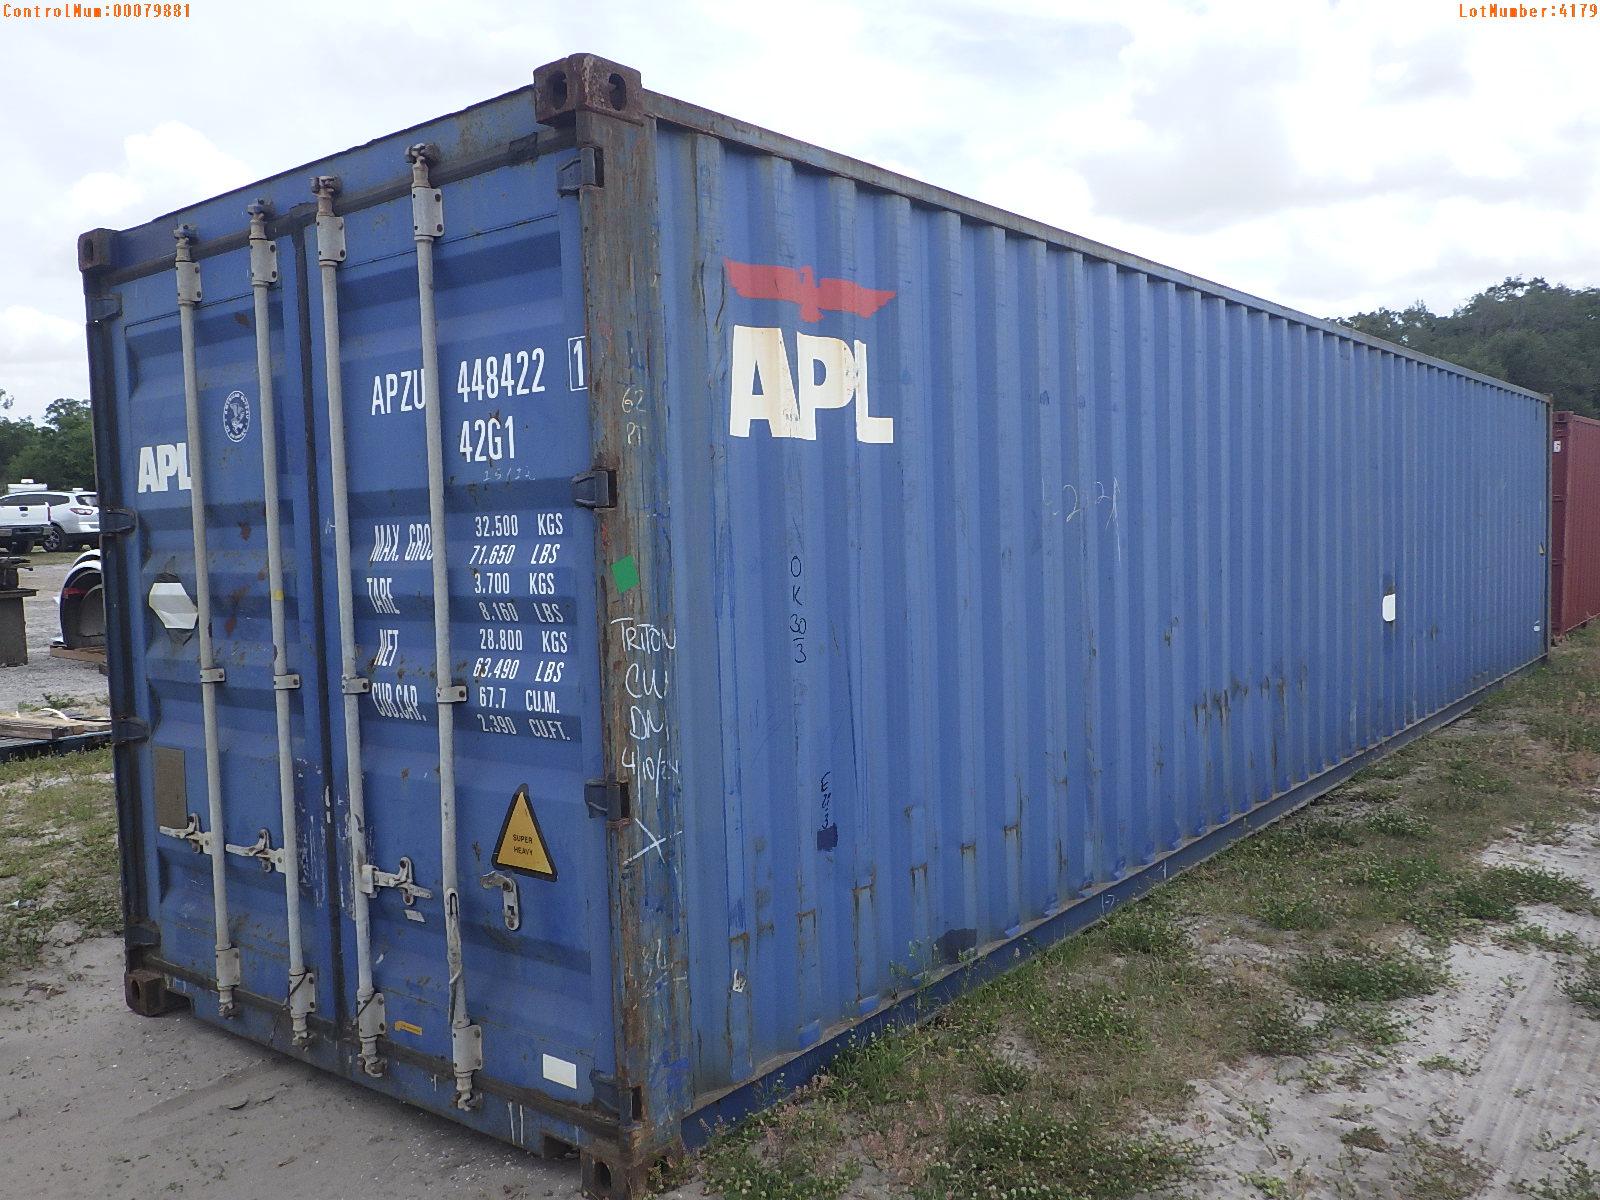 5-04179 (Equip.-Container)  Seller:Private/Dealer TRITON 40 FOOT METAL SHIPPING